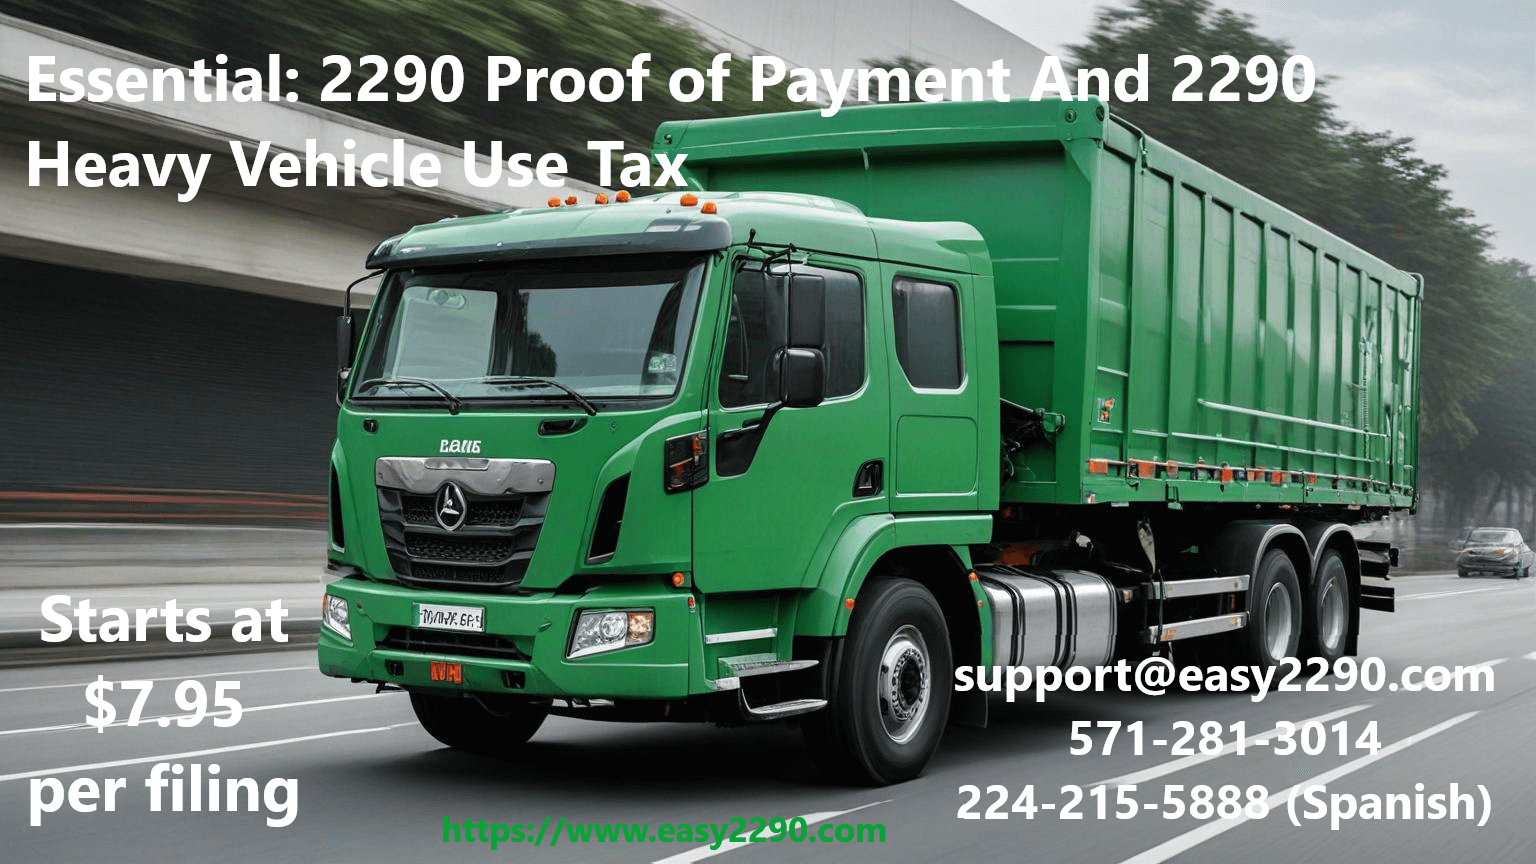 Essential: 2290 Proof of Payment And 2290 Heavy Vehicle Use Tax